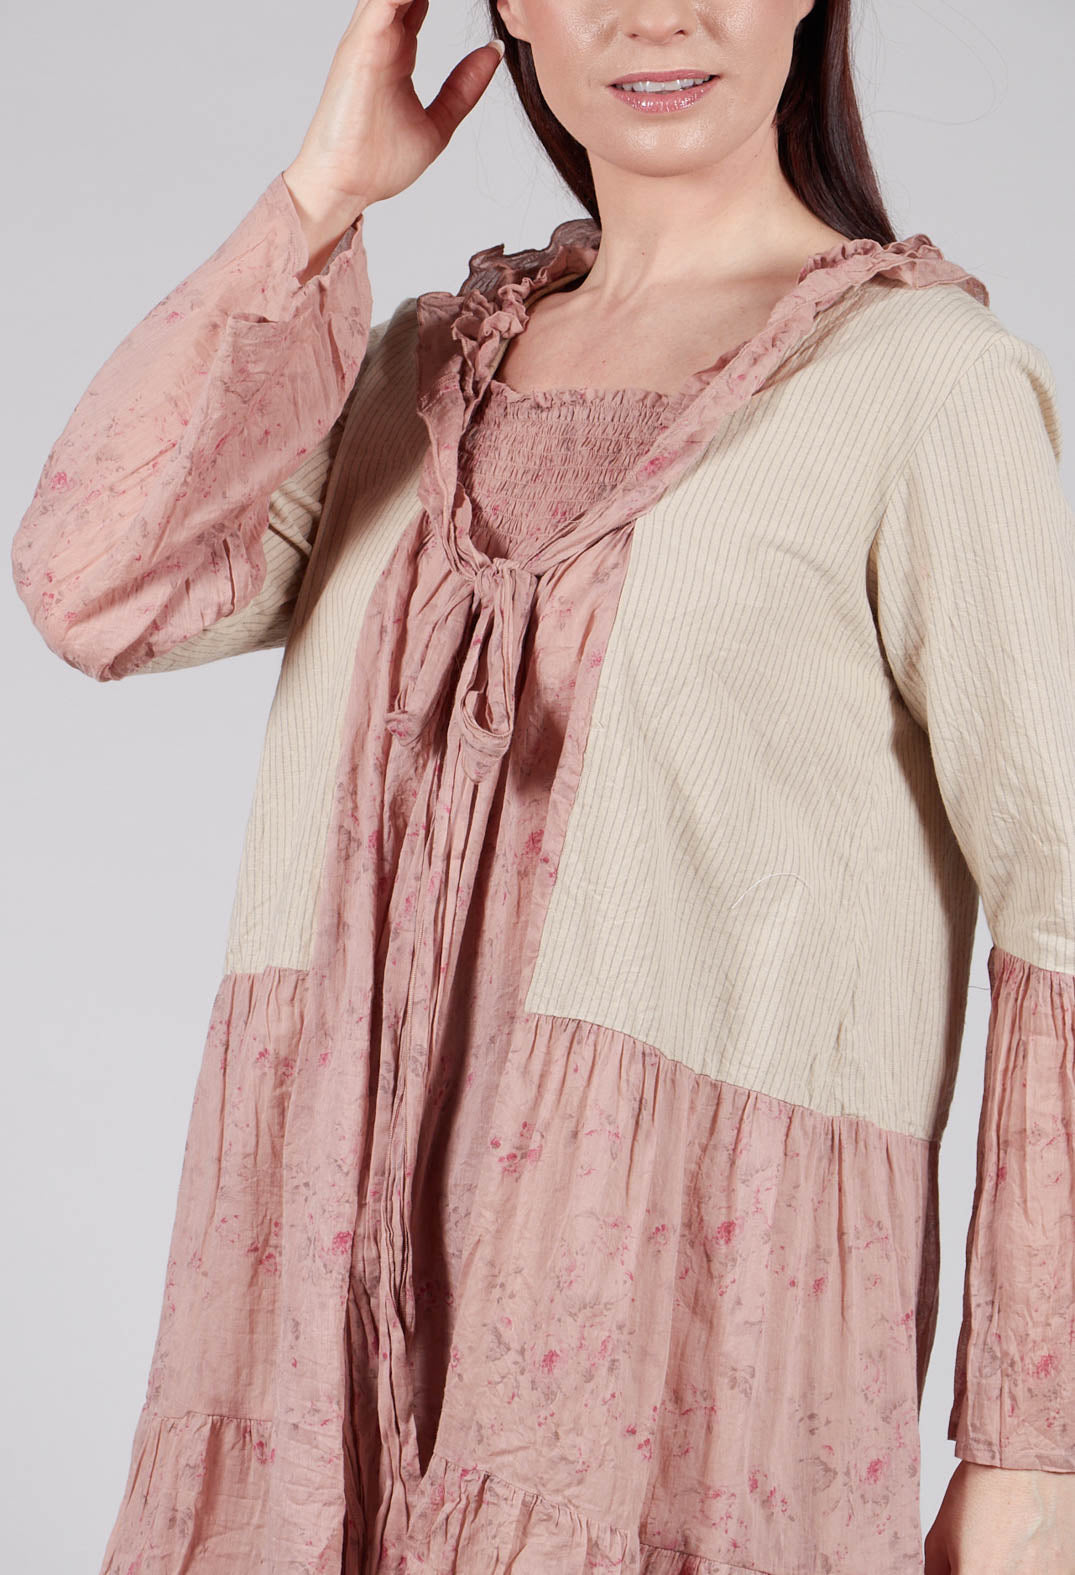 Cassis Blouse in Liberty Pink Print